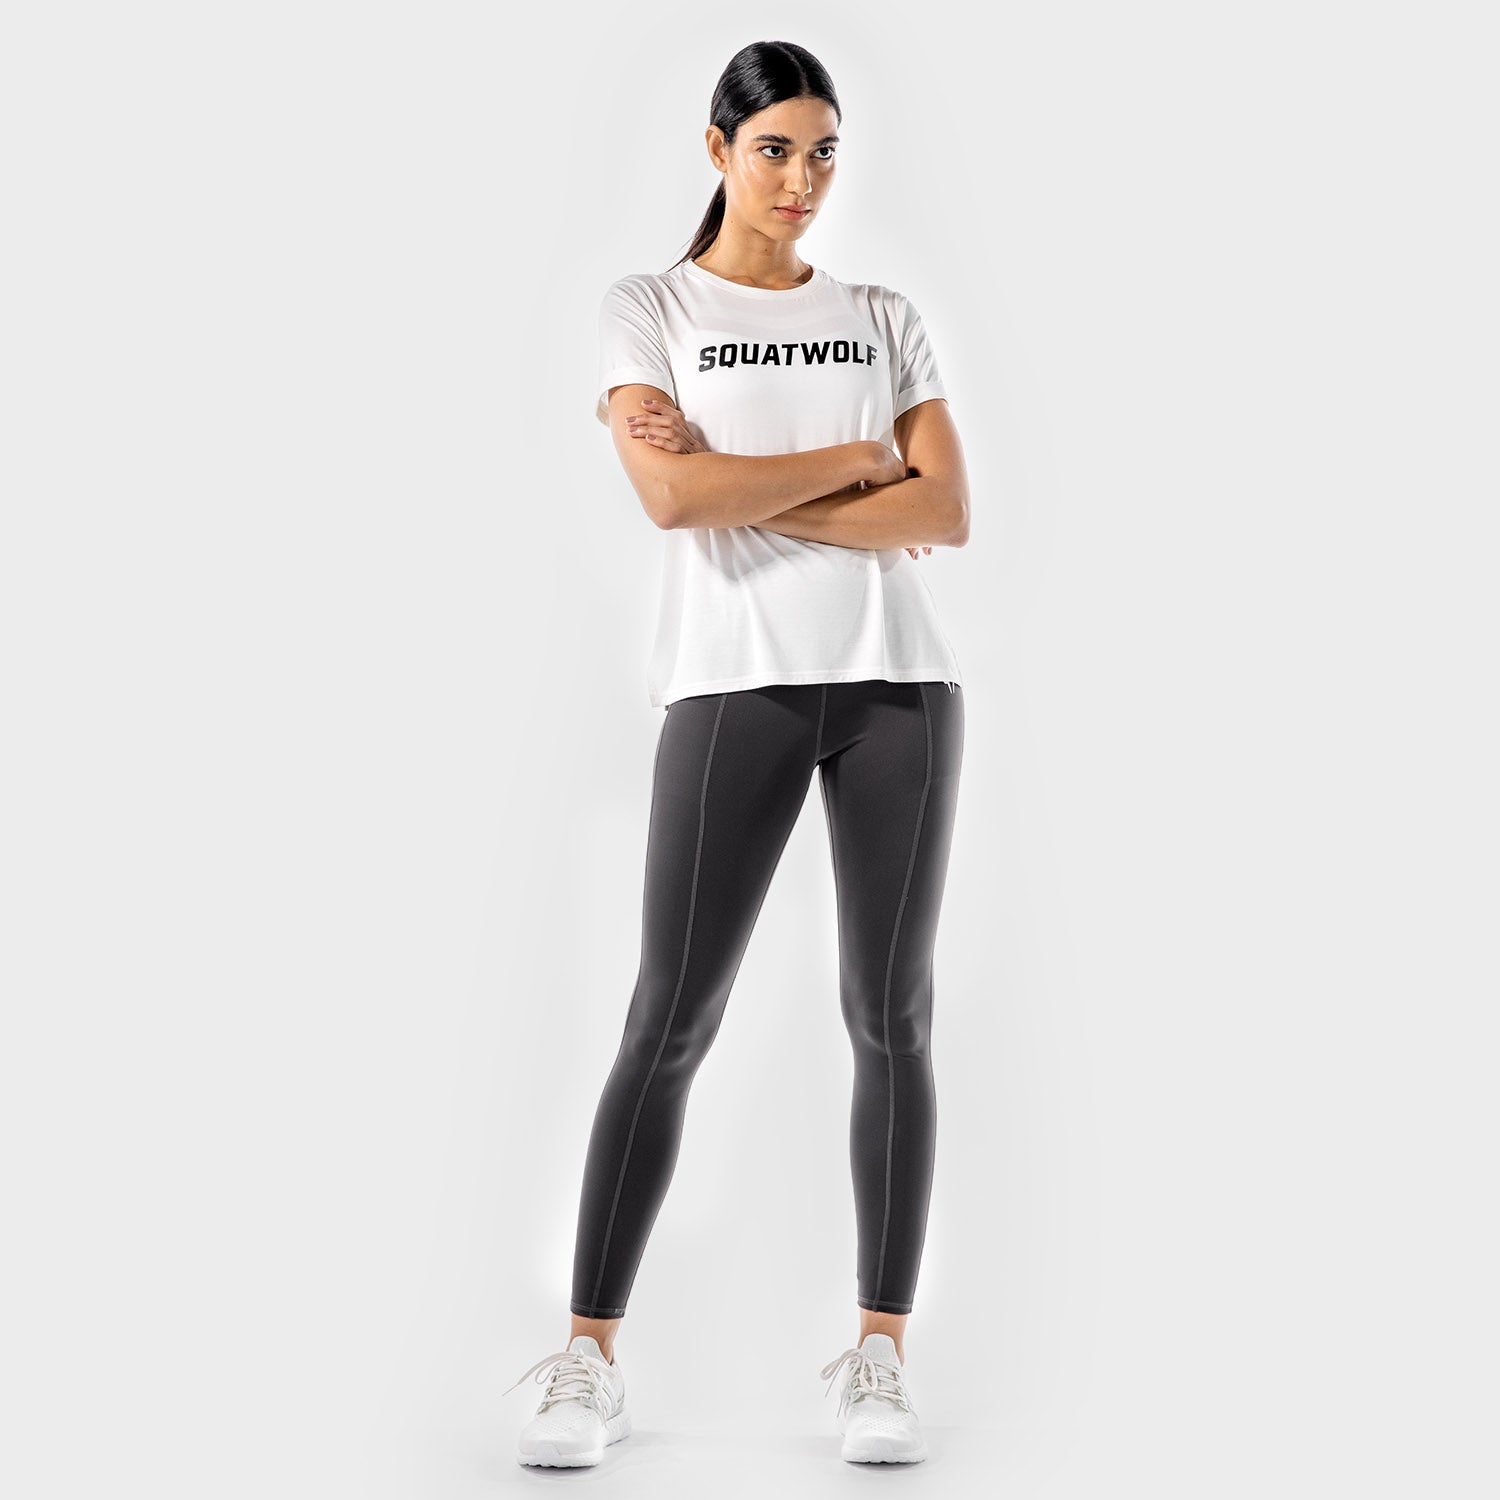 squatwolf-workout-shirts-for-men-new-drop-iconic-tee-white-gym-wear